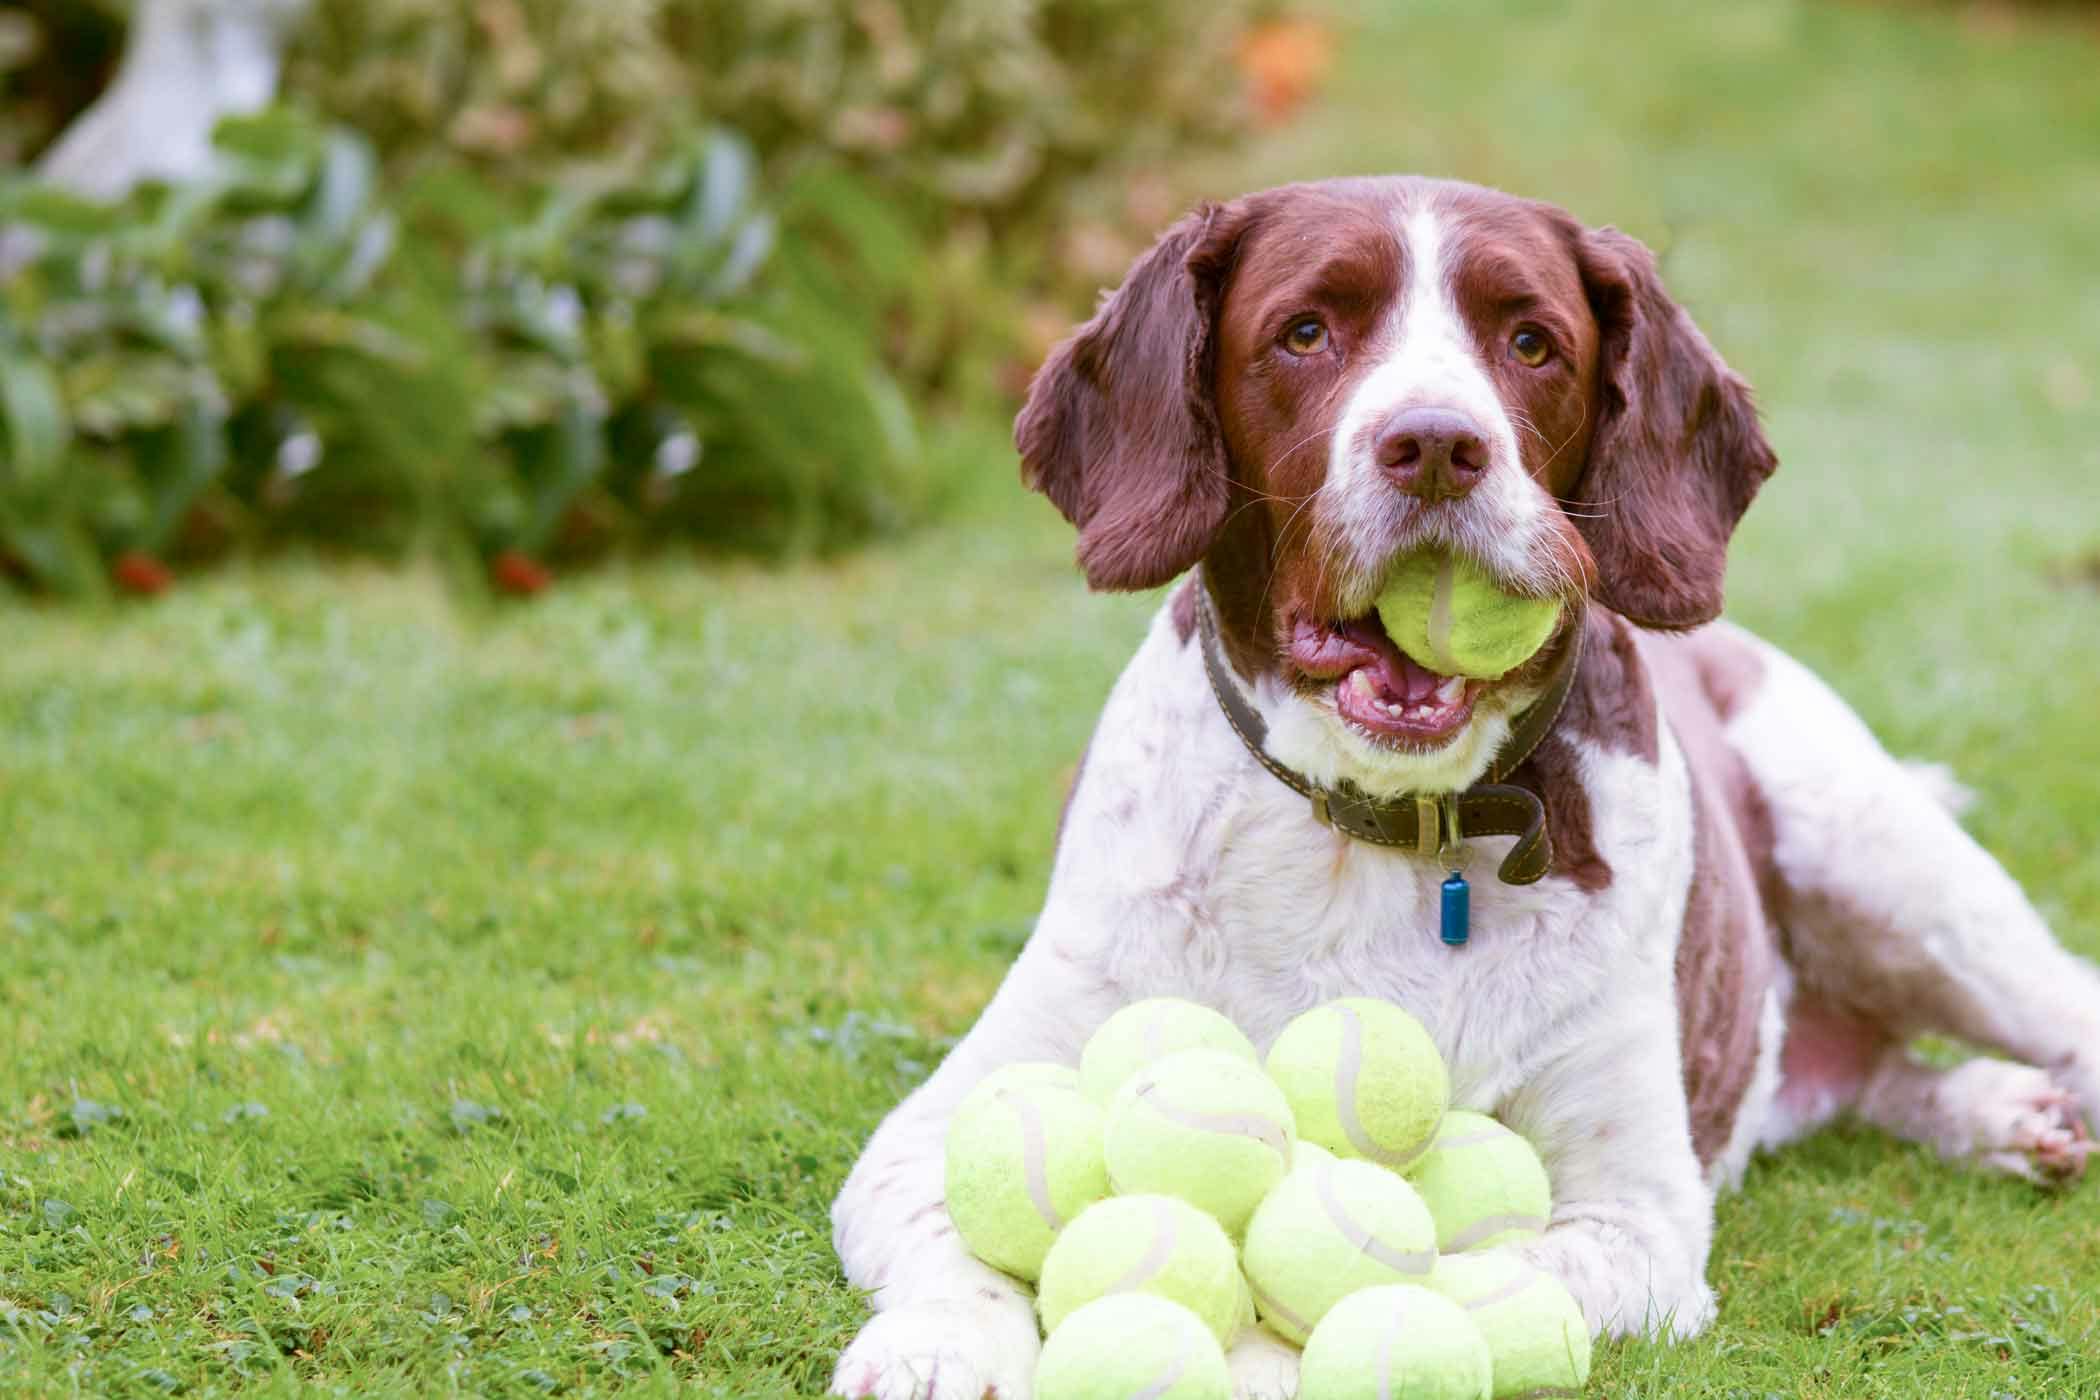 How to Train Your Dog to Use an Automatic Ball Launcher | Wag!